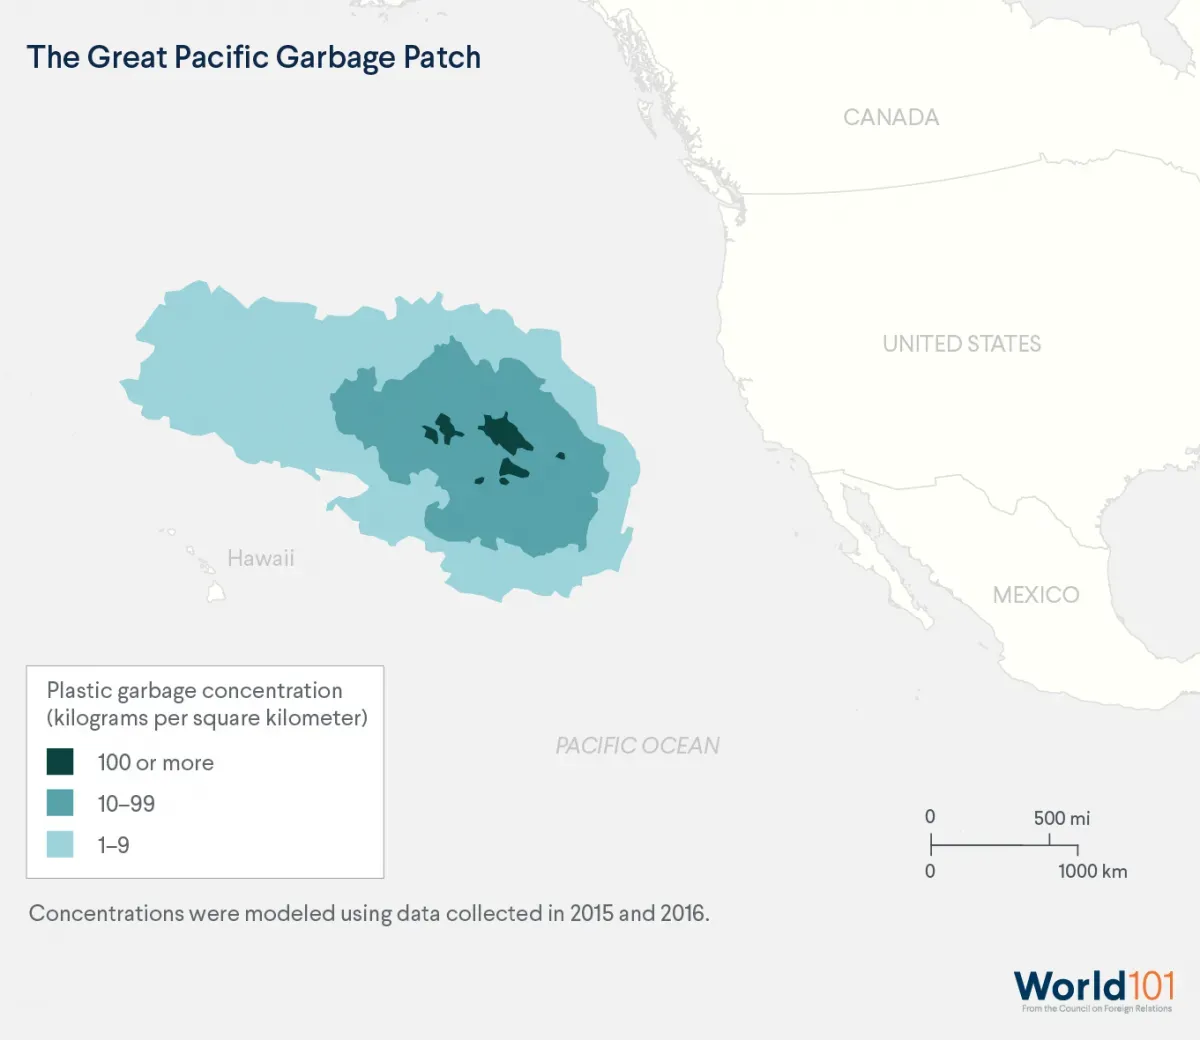 Map of the Great Pacific Garbage Patch, which covers a wide swatch of the Pacific Ocean near Hawaii (based on models using data collected in 2015 and 2016). For more info contact us at world101@cfr.org.